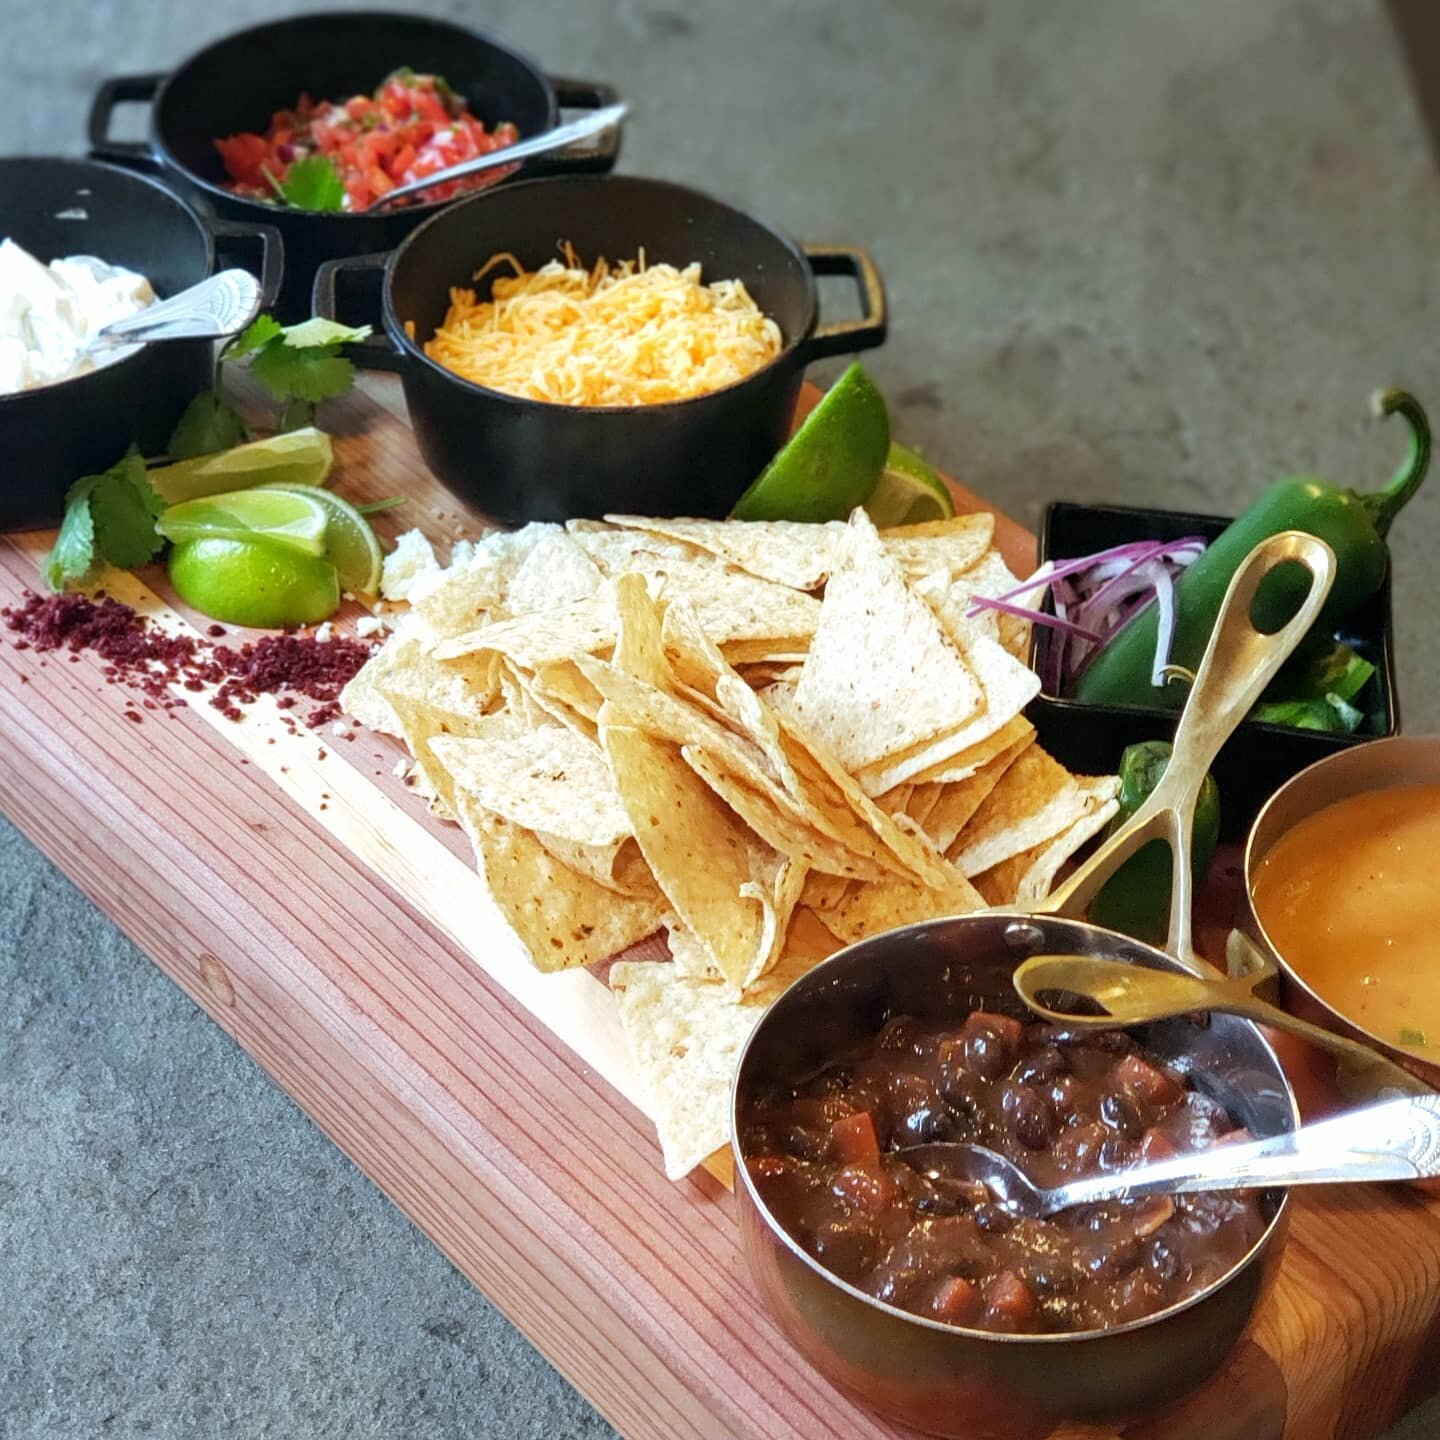 Nacho average Sunday this week! 🏈
We've cteated the ultimate nacho kit for the big game. Featuring house made queso dip, smoky black beans, pickled red onions, pico de gallo, jalape&ntilde;os, crema fresca, pepper jack, black olives and a generous a